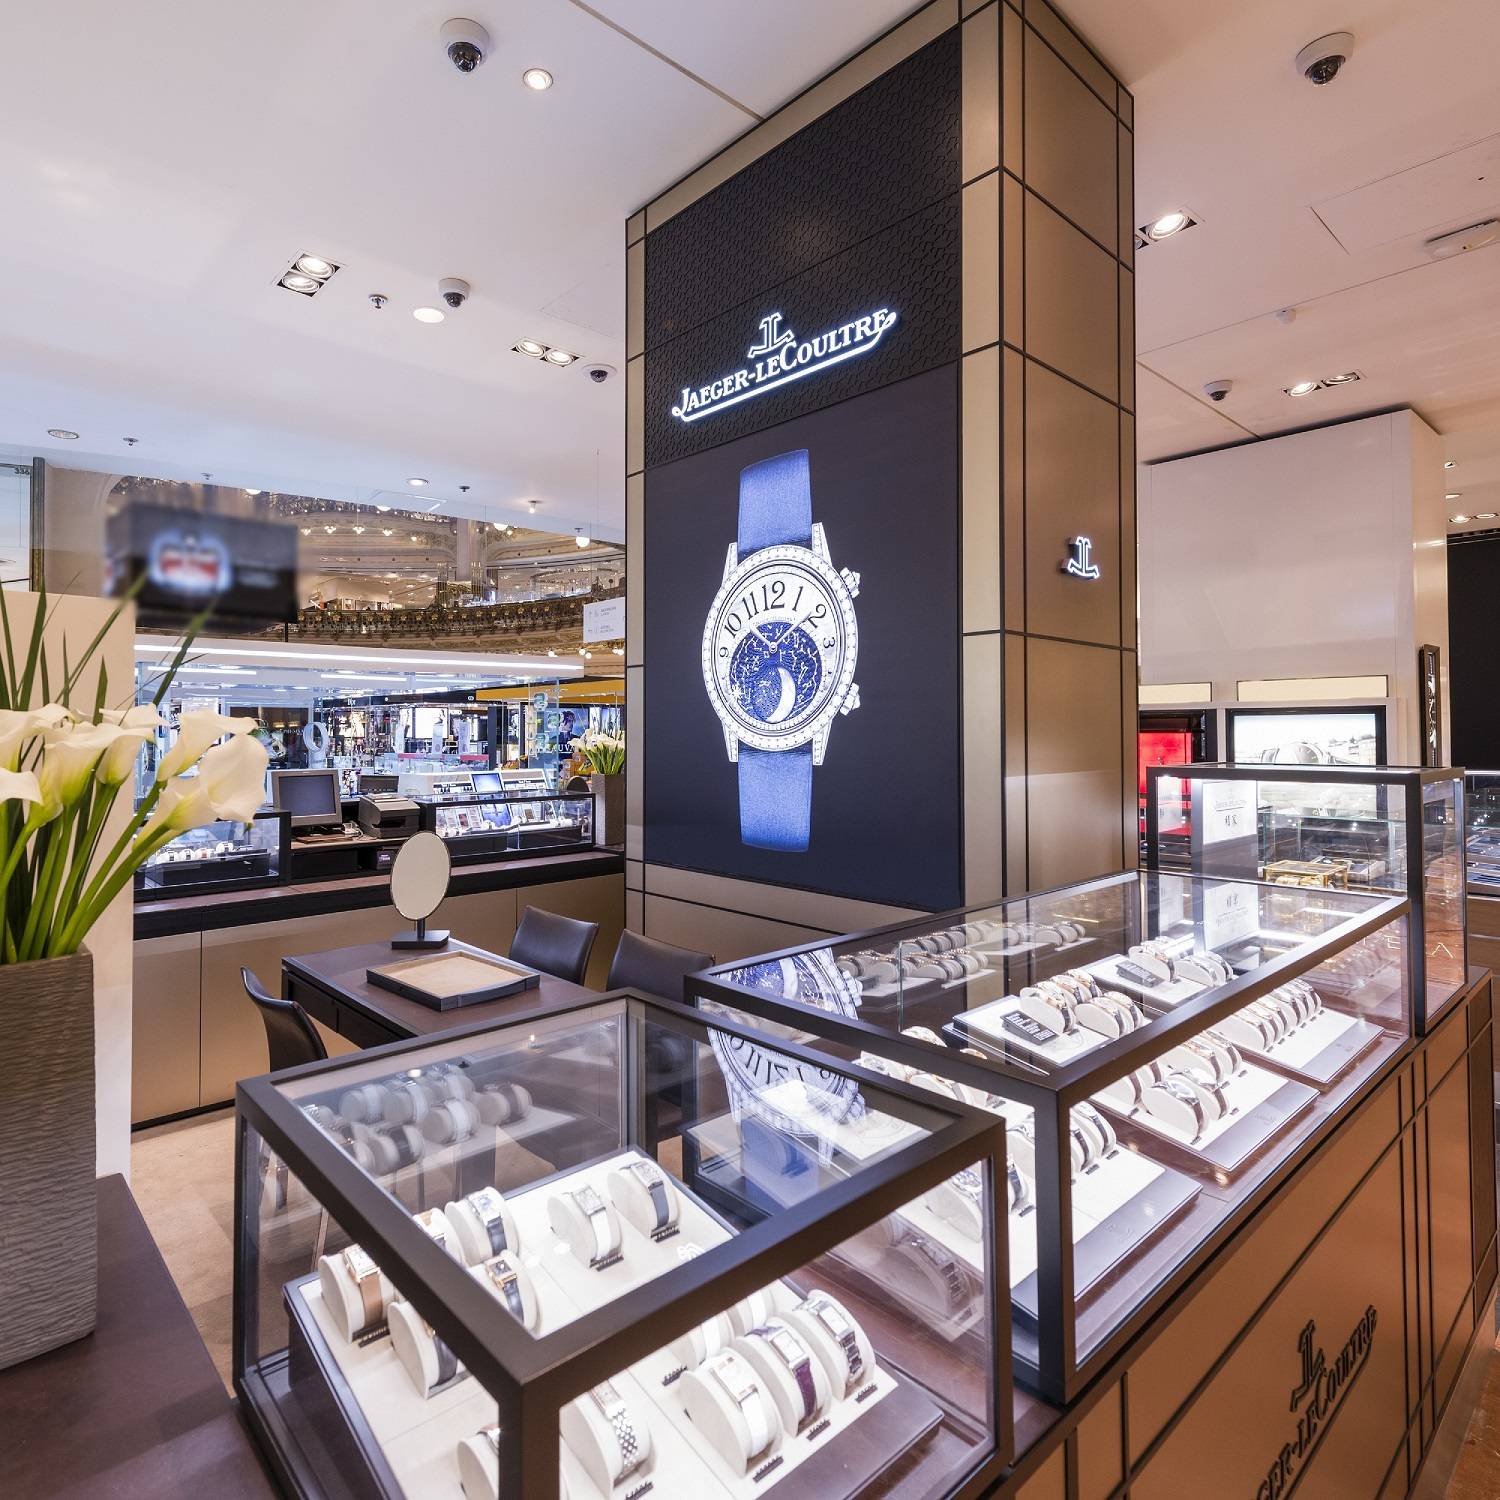 Jaeger-LeCoultre at Galeries Lafayette ©olivierRolfe